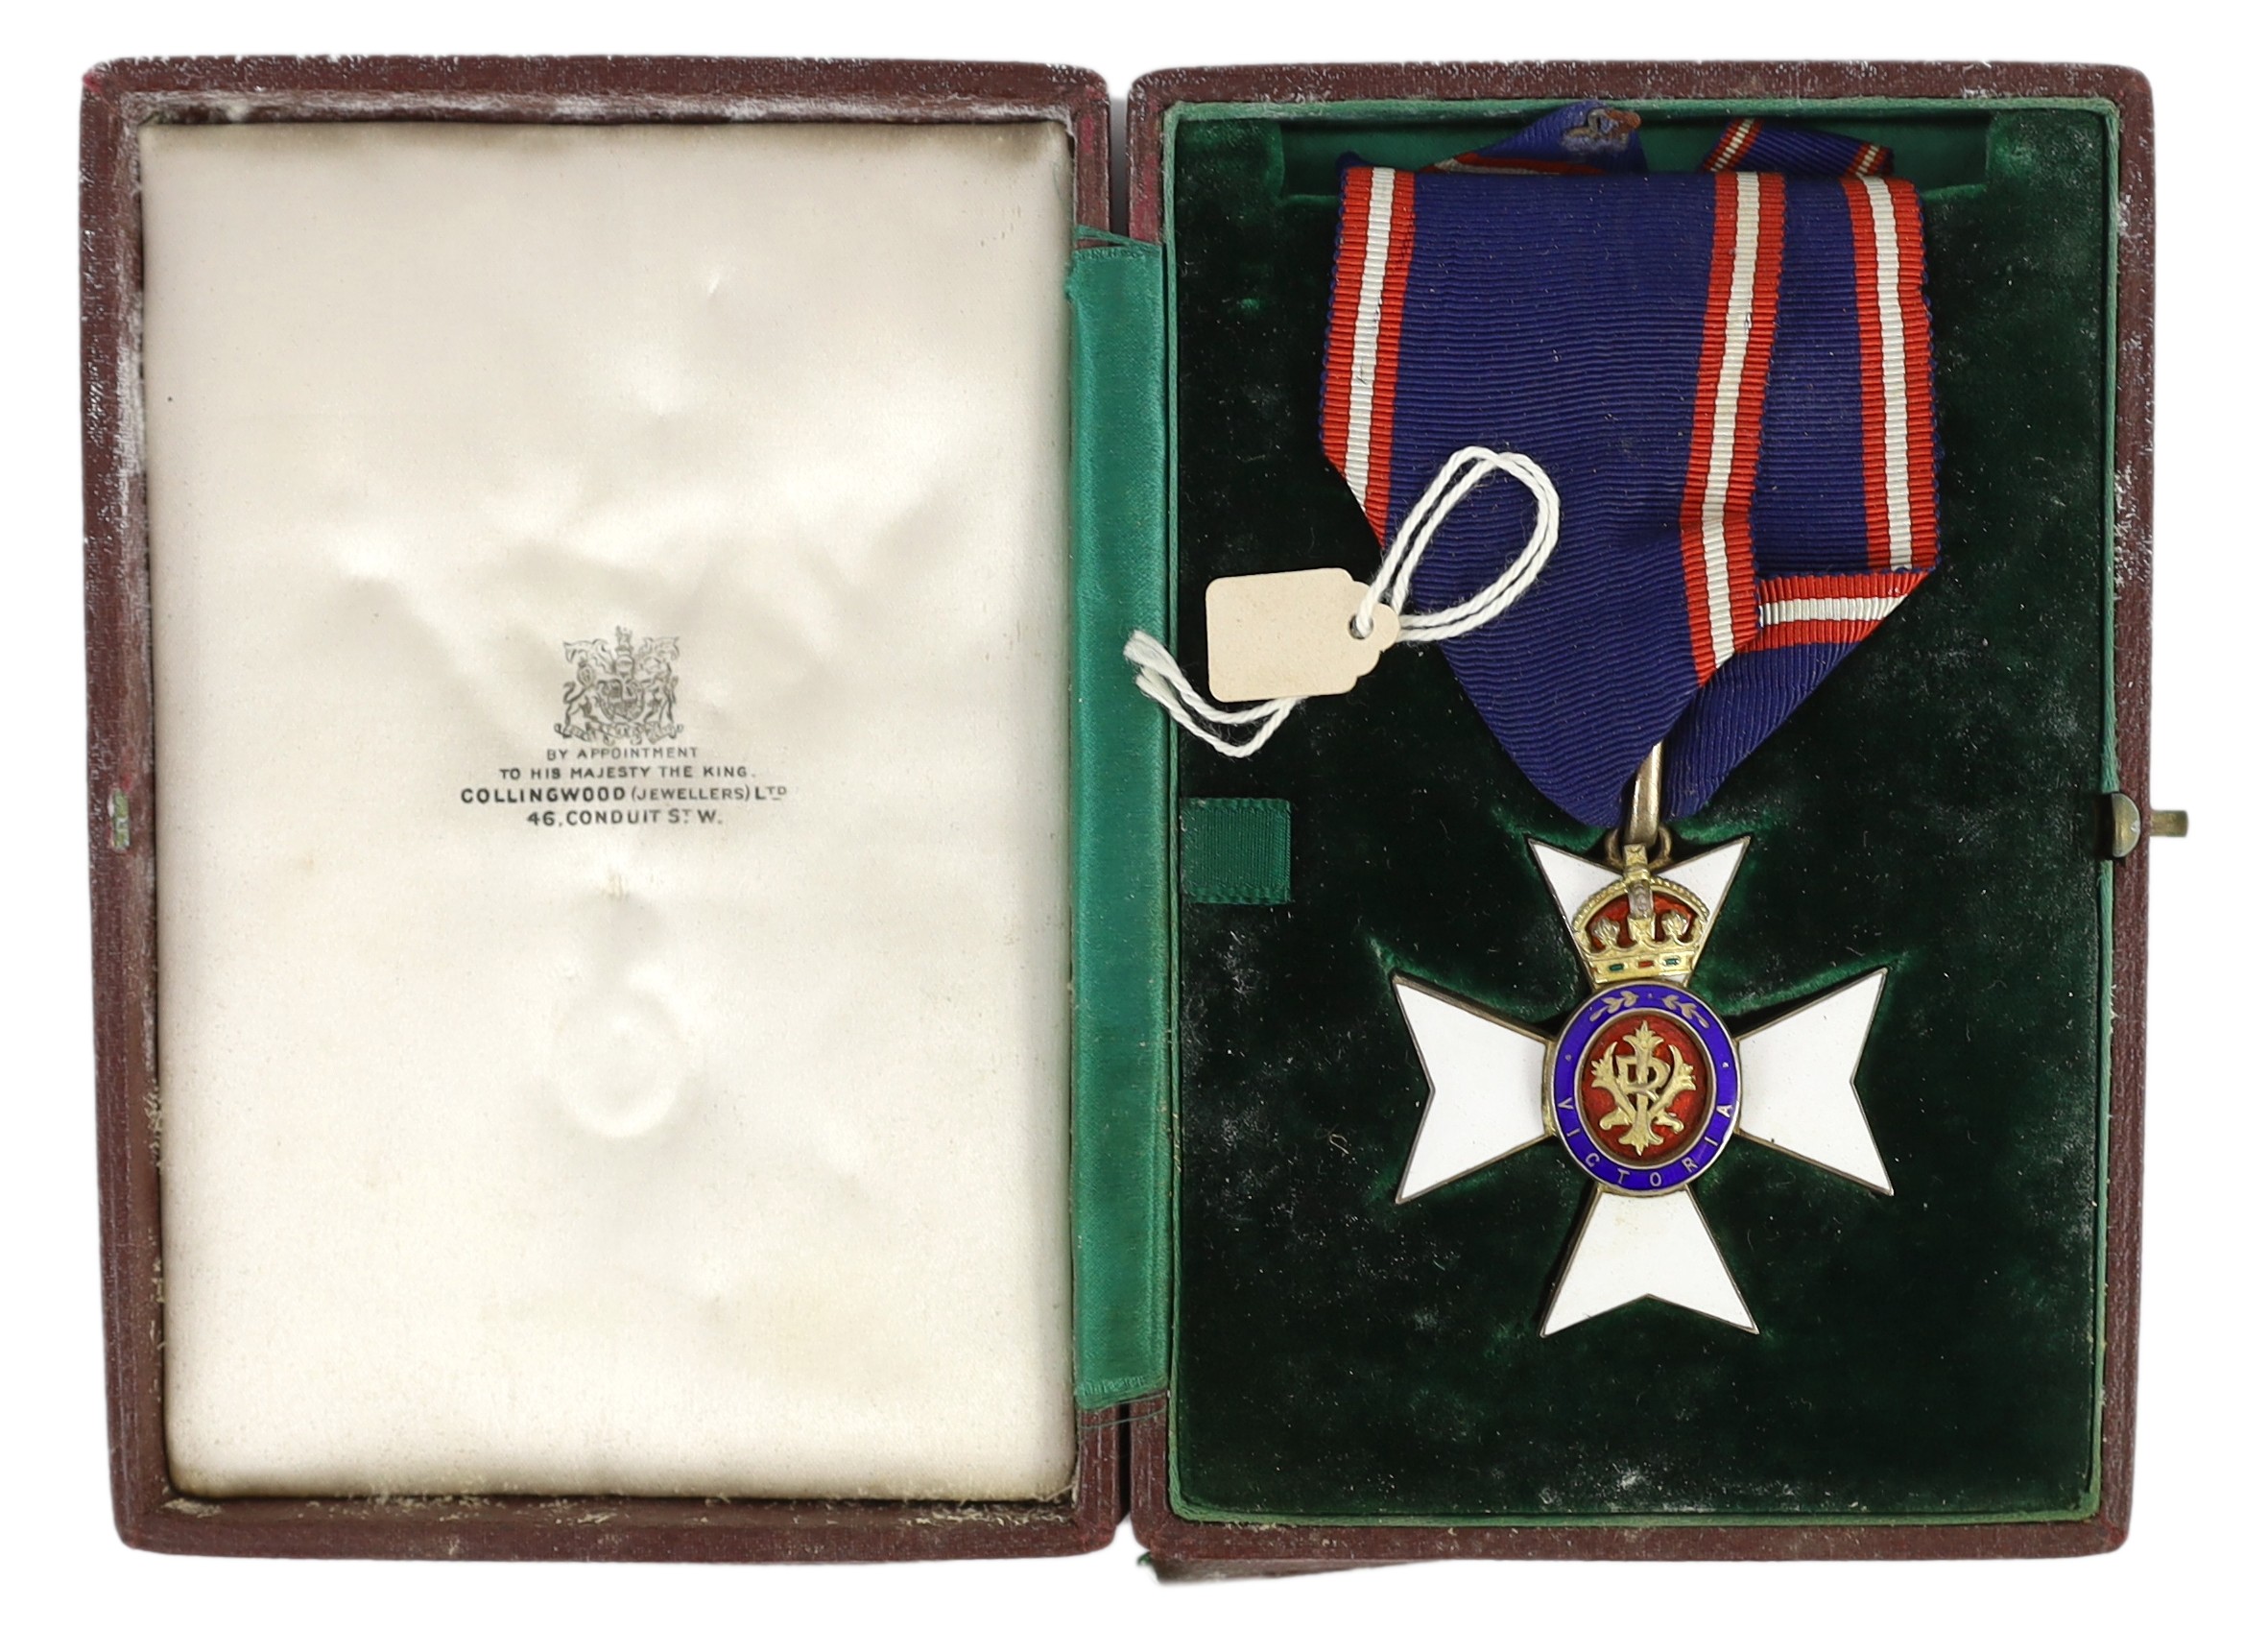 Orders and medals, a KCMG and CVO to Sir Oswald Raynor Arthur (1905-1973) and a GCVO and MBE awarded to other family members